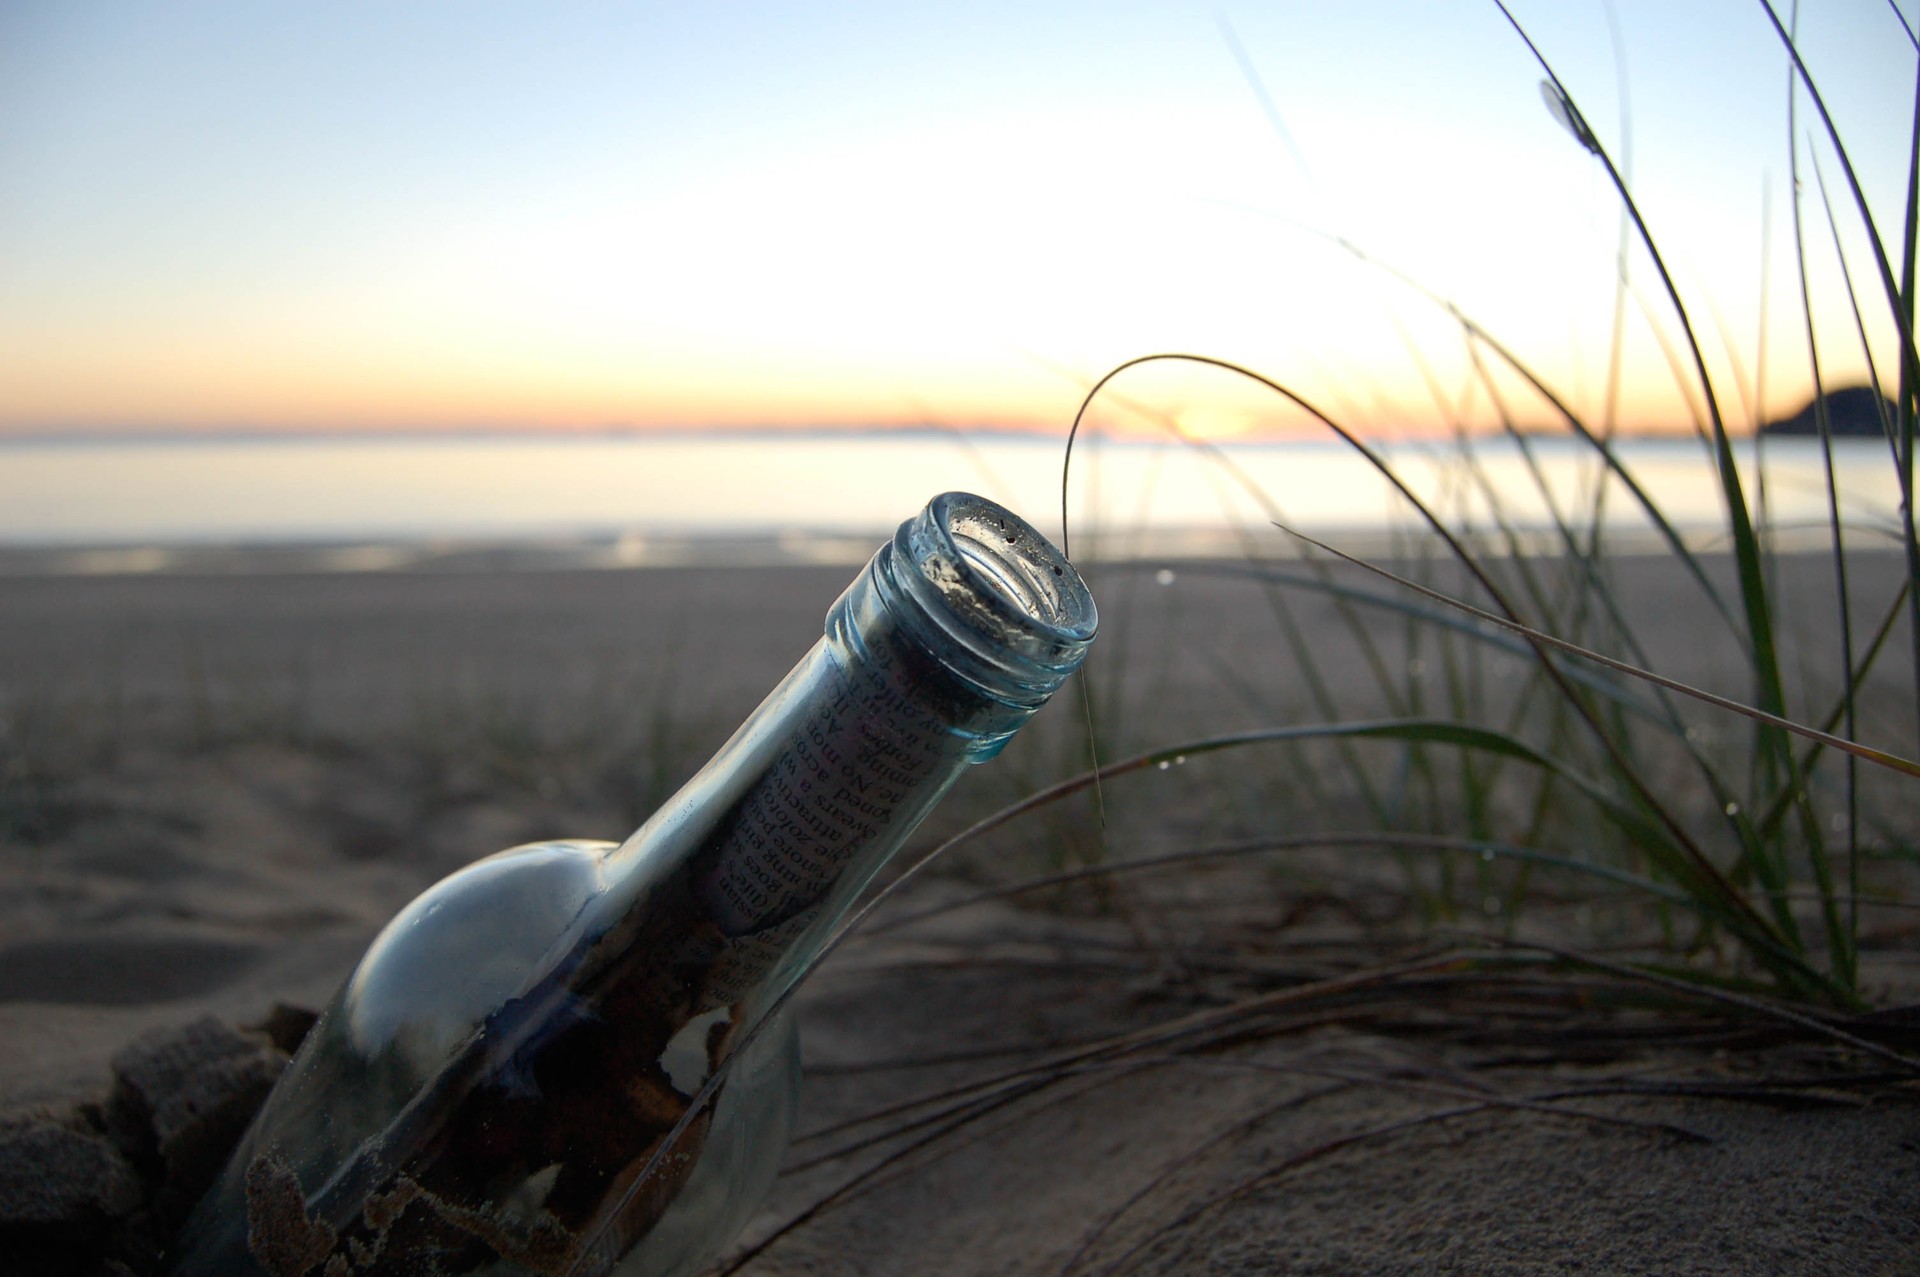 Photo of a Bottle on the Beach